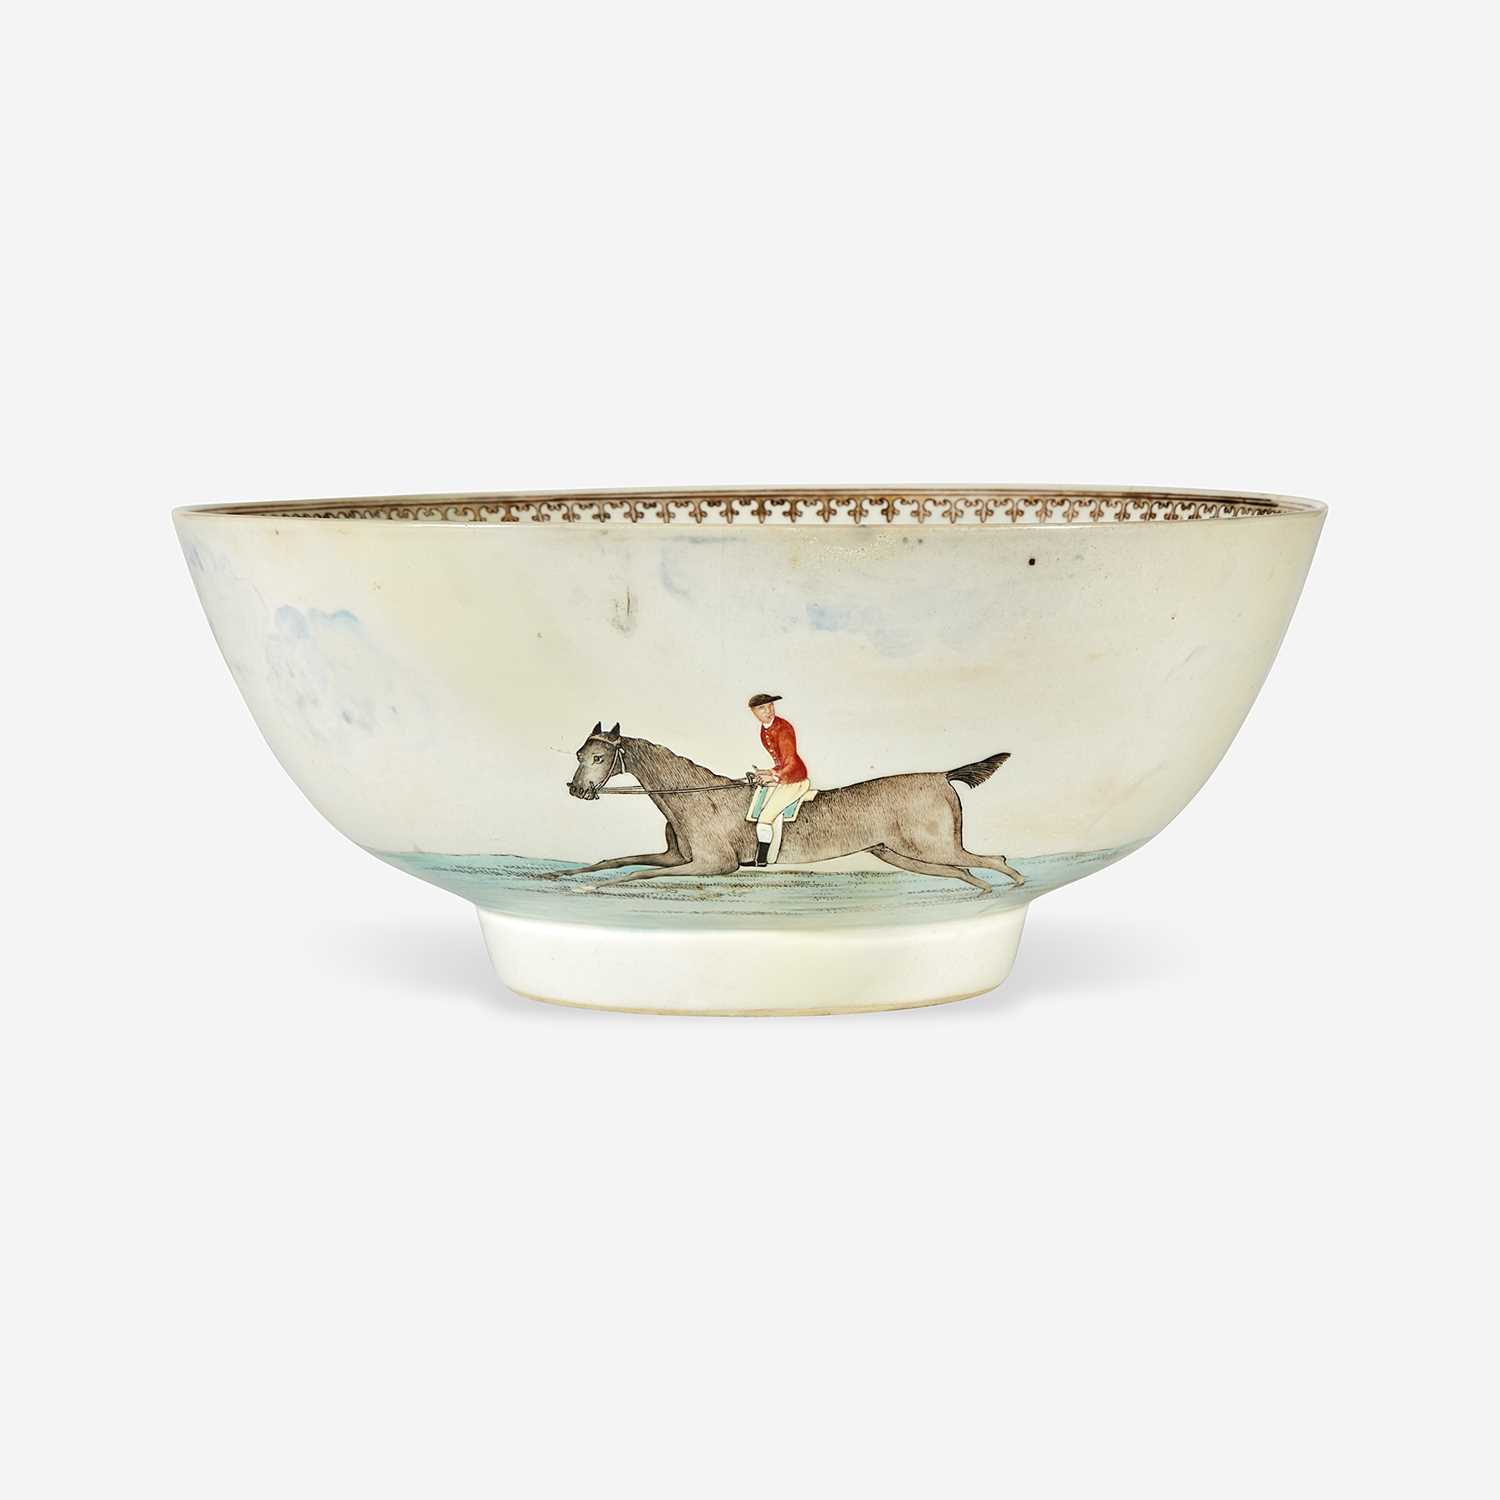 Lot 94 - A Chinese Export porcelain gilt and polychrome decorated punch bowl with horses and riders